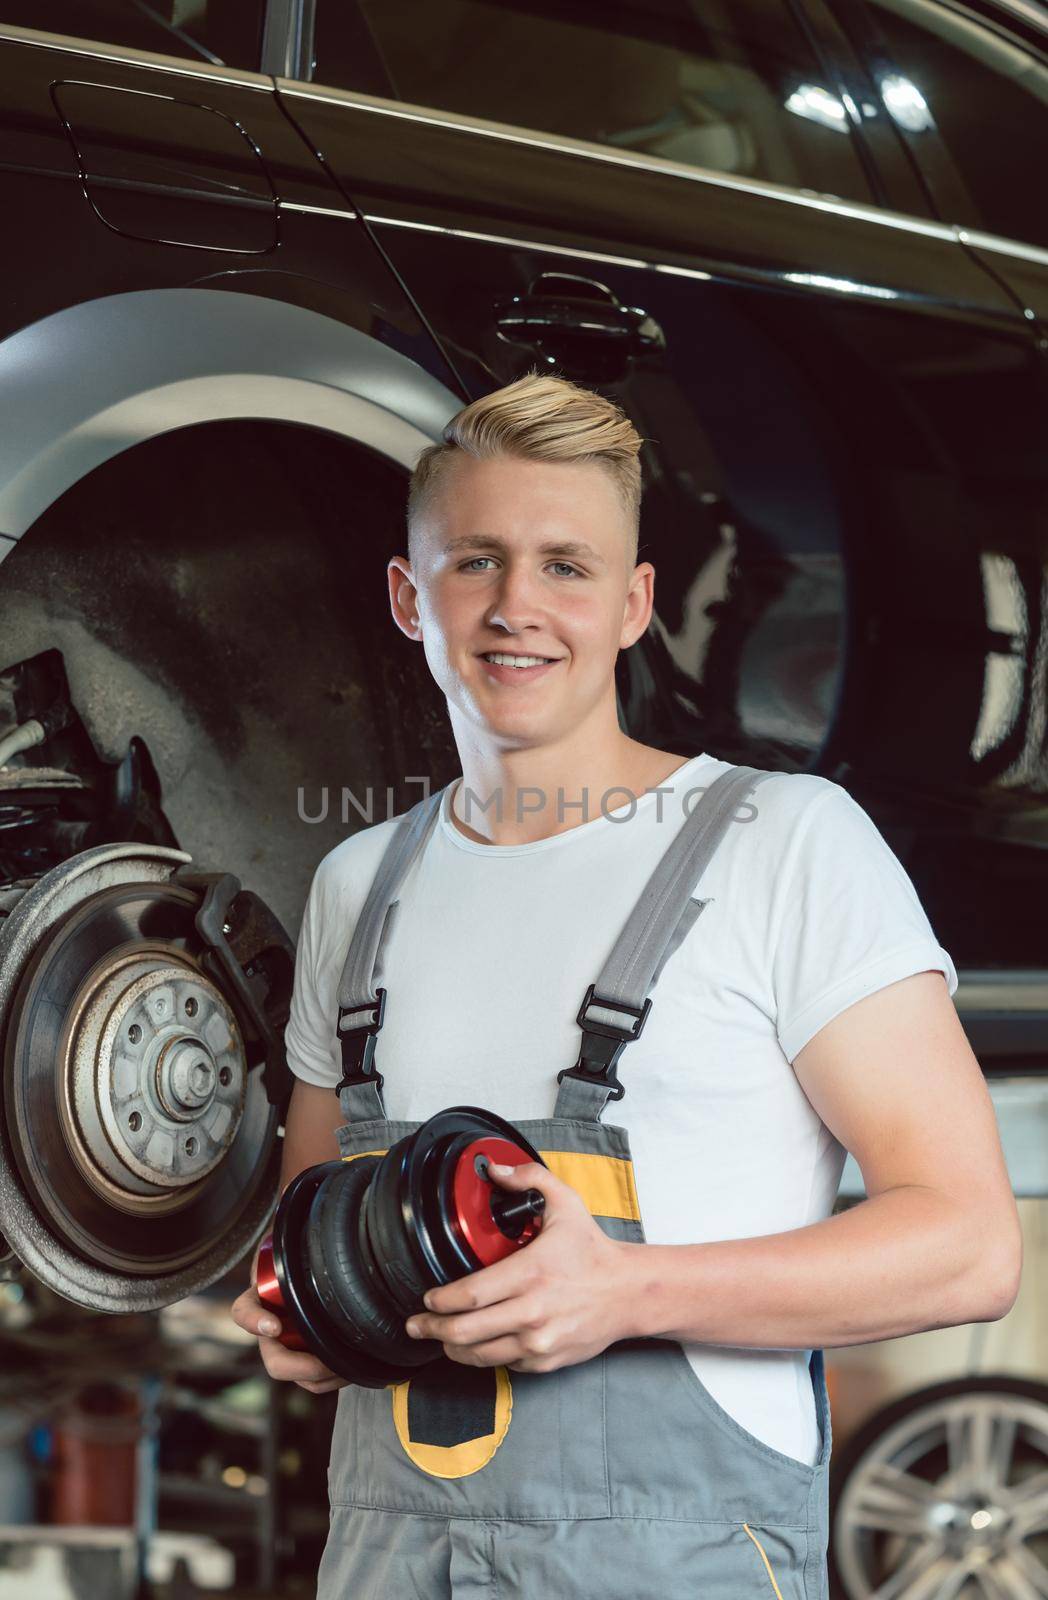 Low-angle view portrait of a confident young auto mechanic holding a new air suspension system, while working at the tuning of a car in a modern automobile repair shop